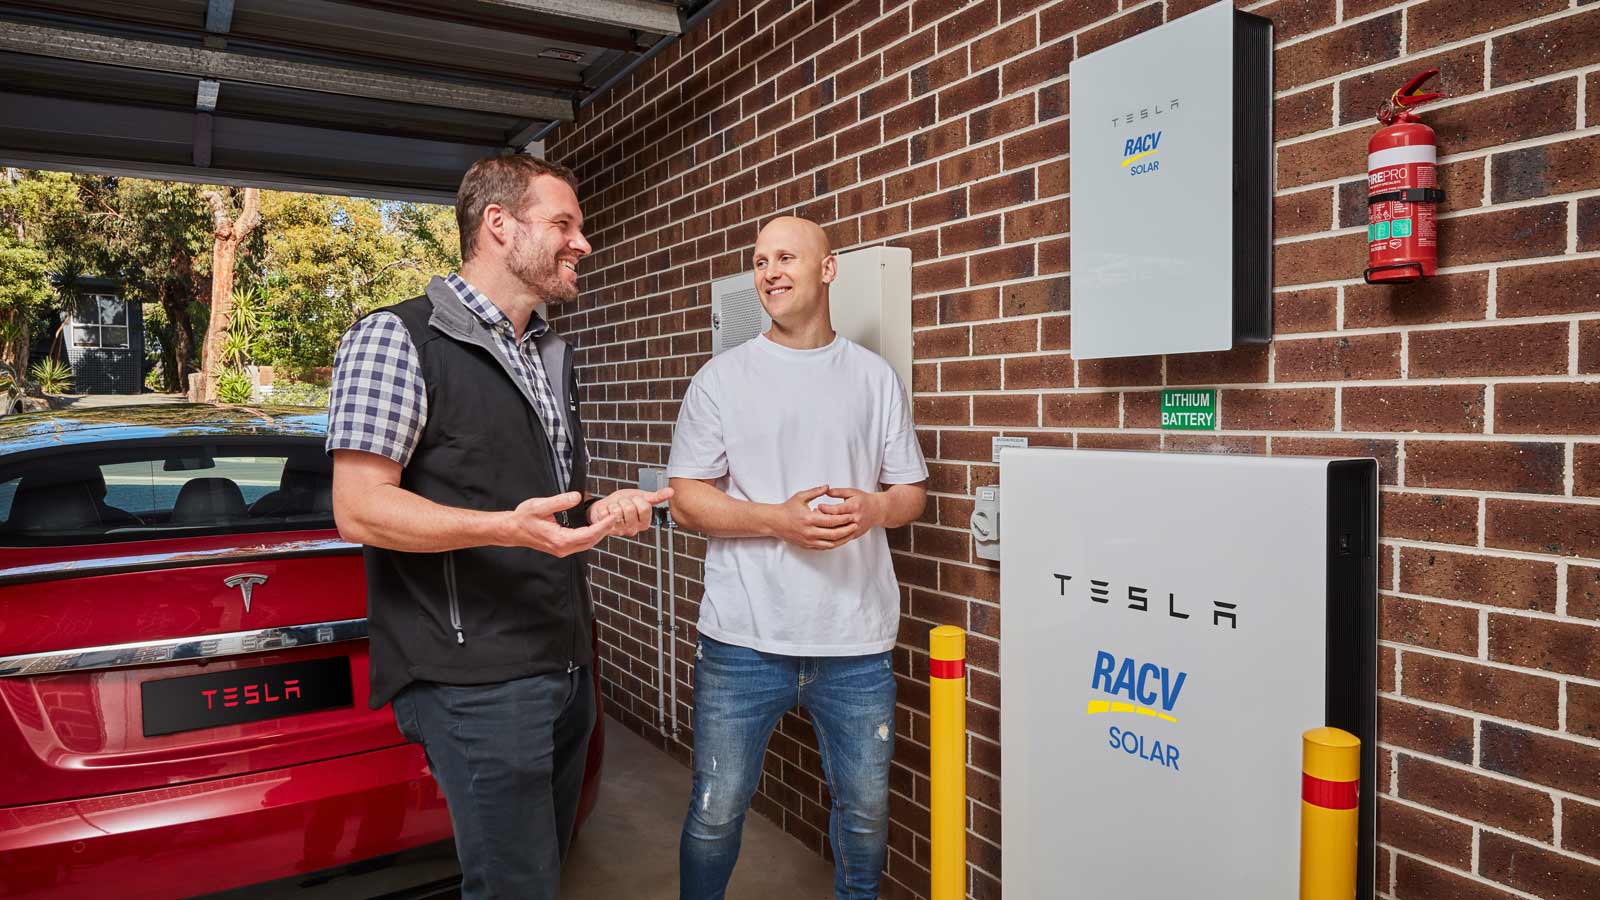 Two smiling men talking in front of a red Tesla and Tesla powerwall battery.